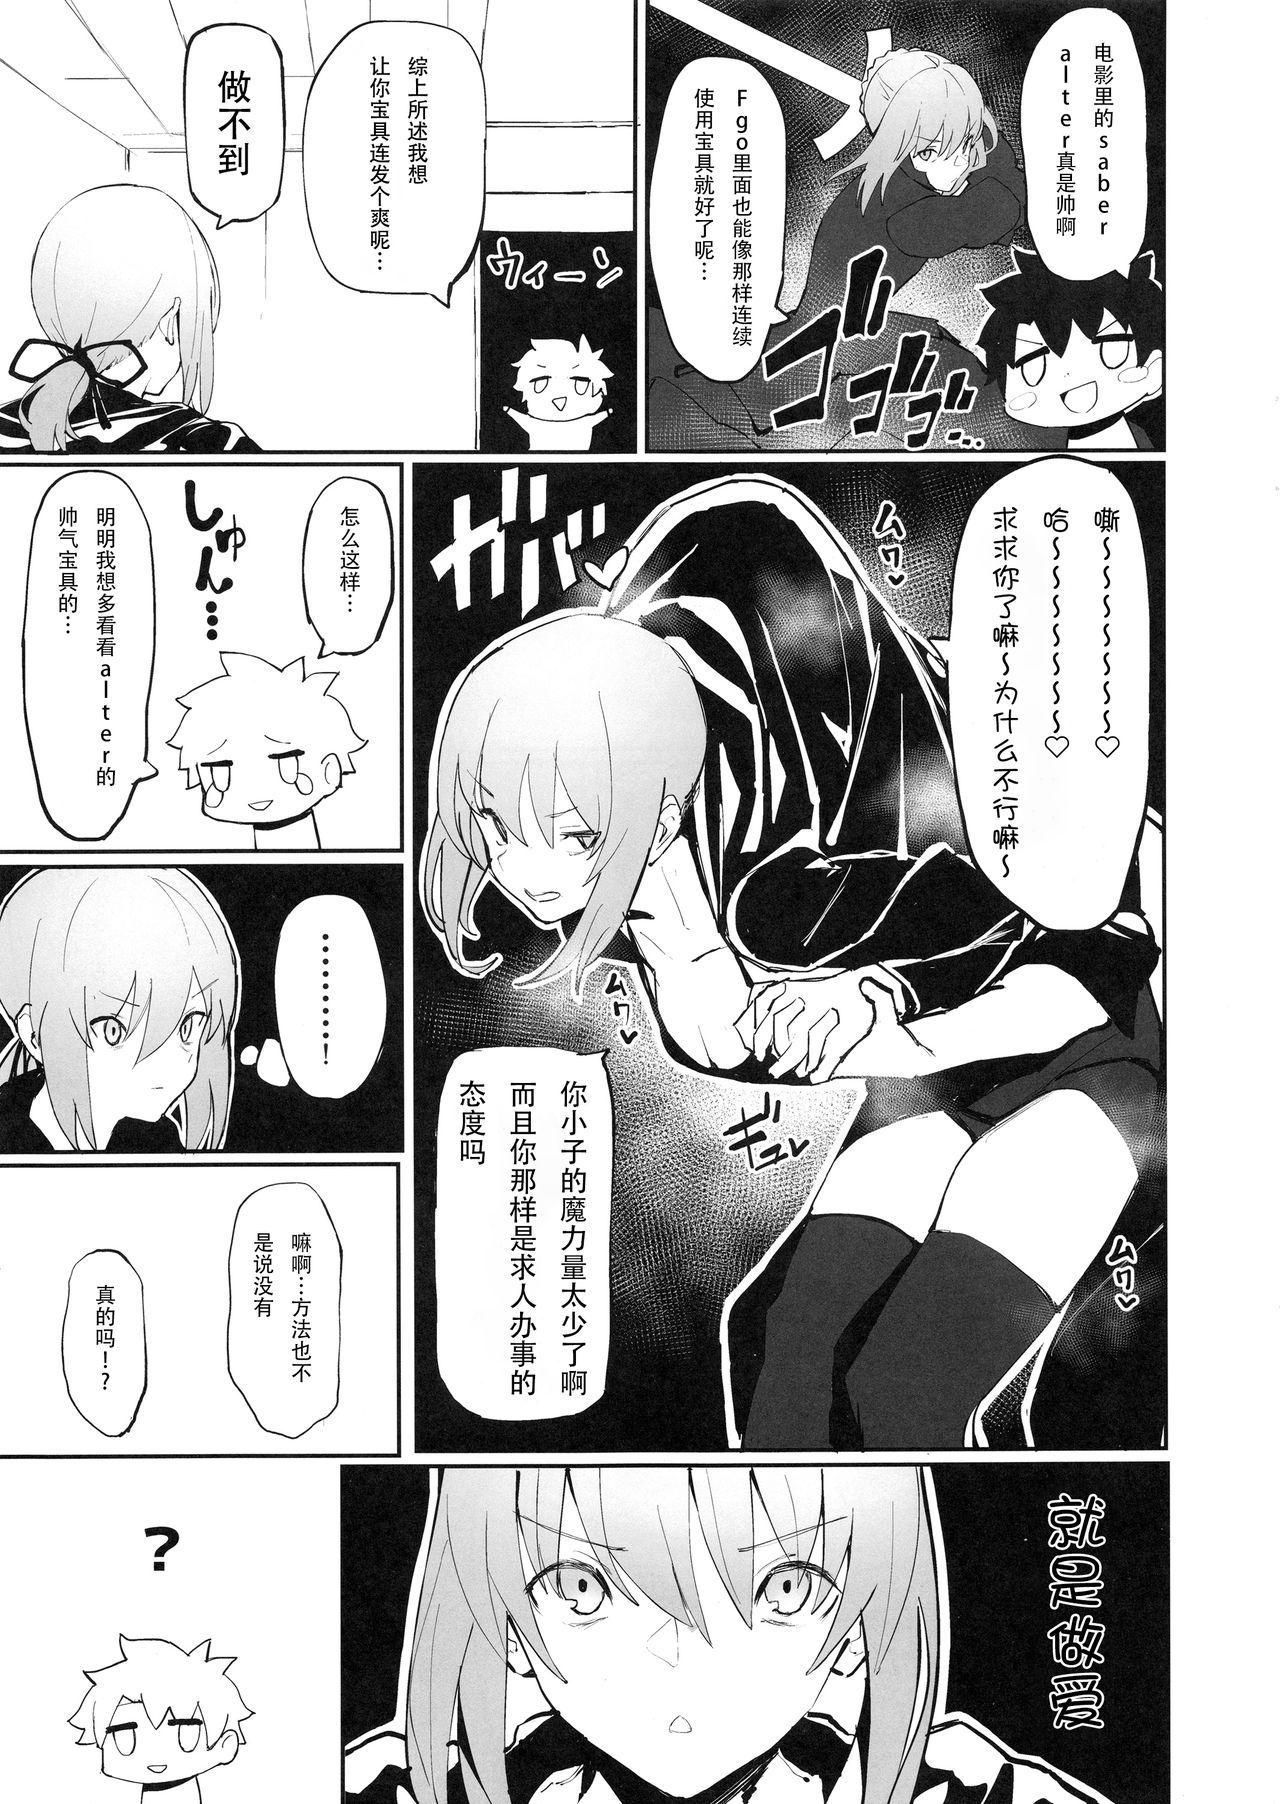 Top Saber Alter to Maryoku Kyoukyuu | 和saber alter的魔力供给♡ - Fate grand order Secretary - Page 2